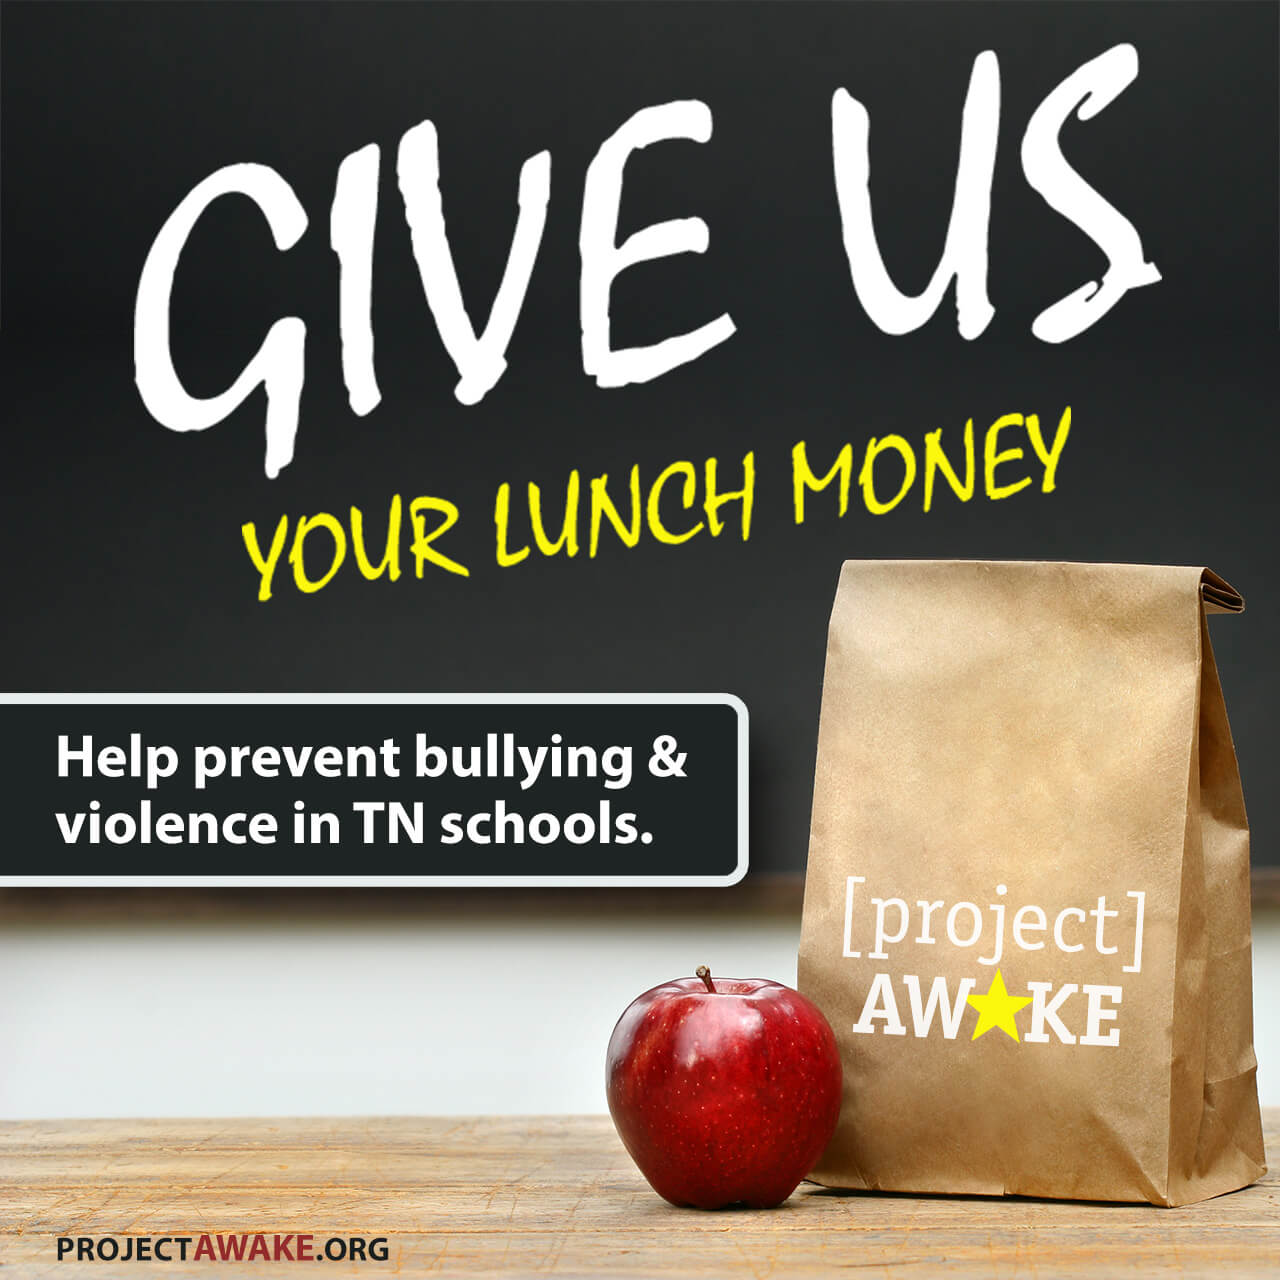 End bullying in schools. Give us your lunch money!